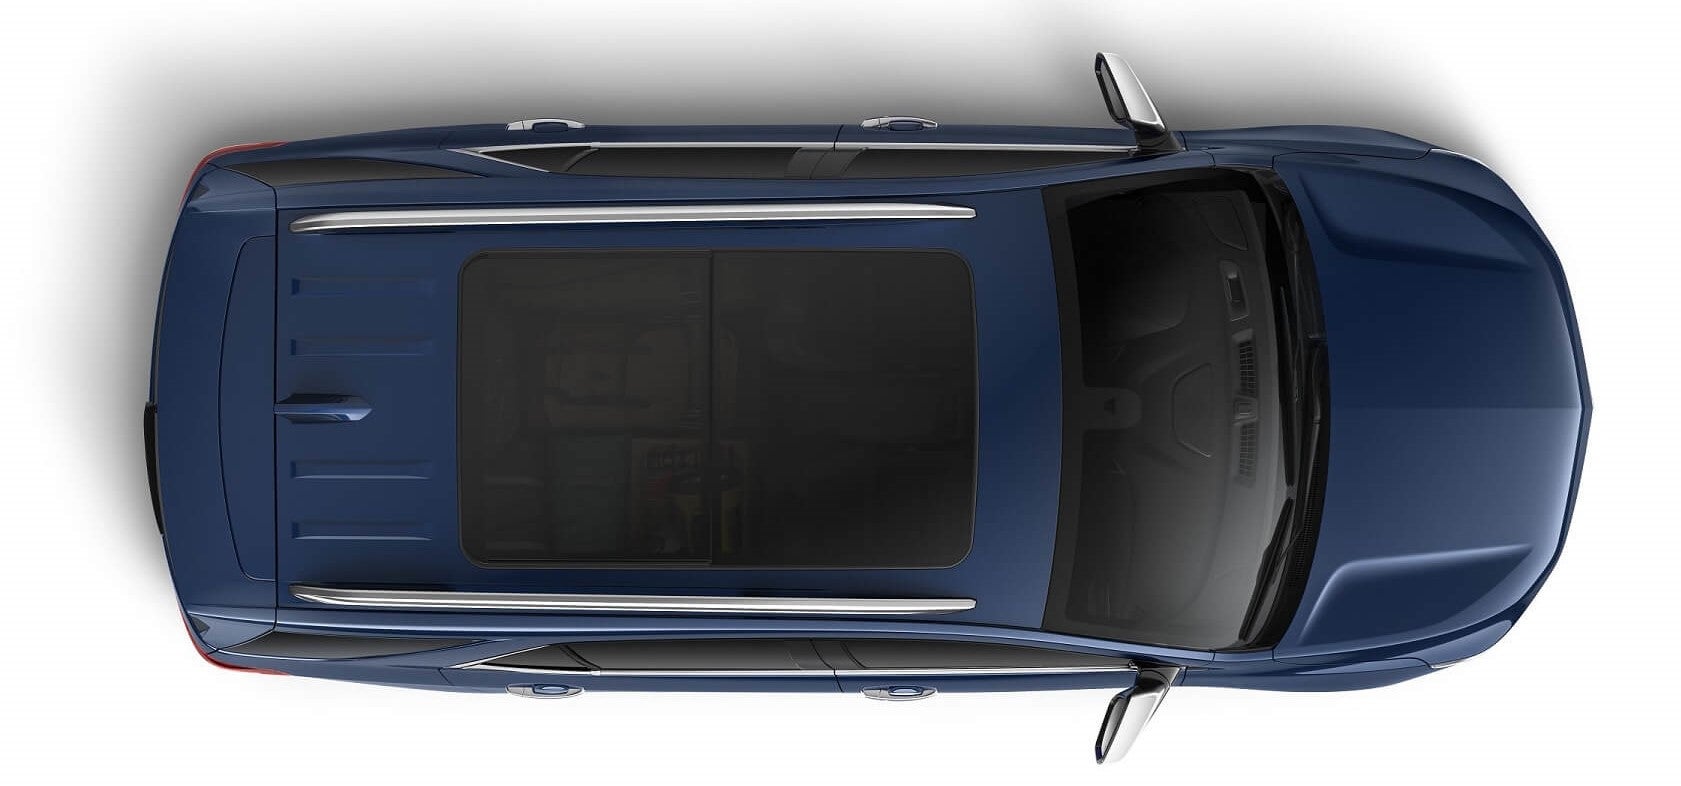 Top-down view of blue Chevy Equinox showcasing the large sunroof